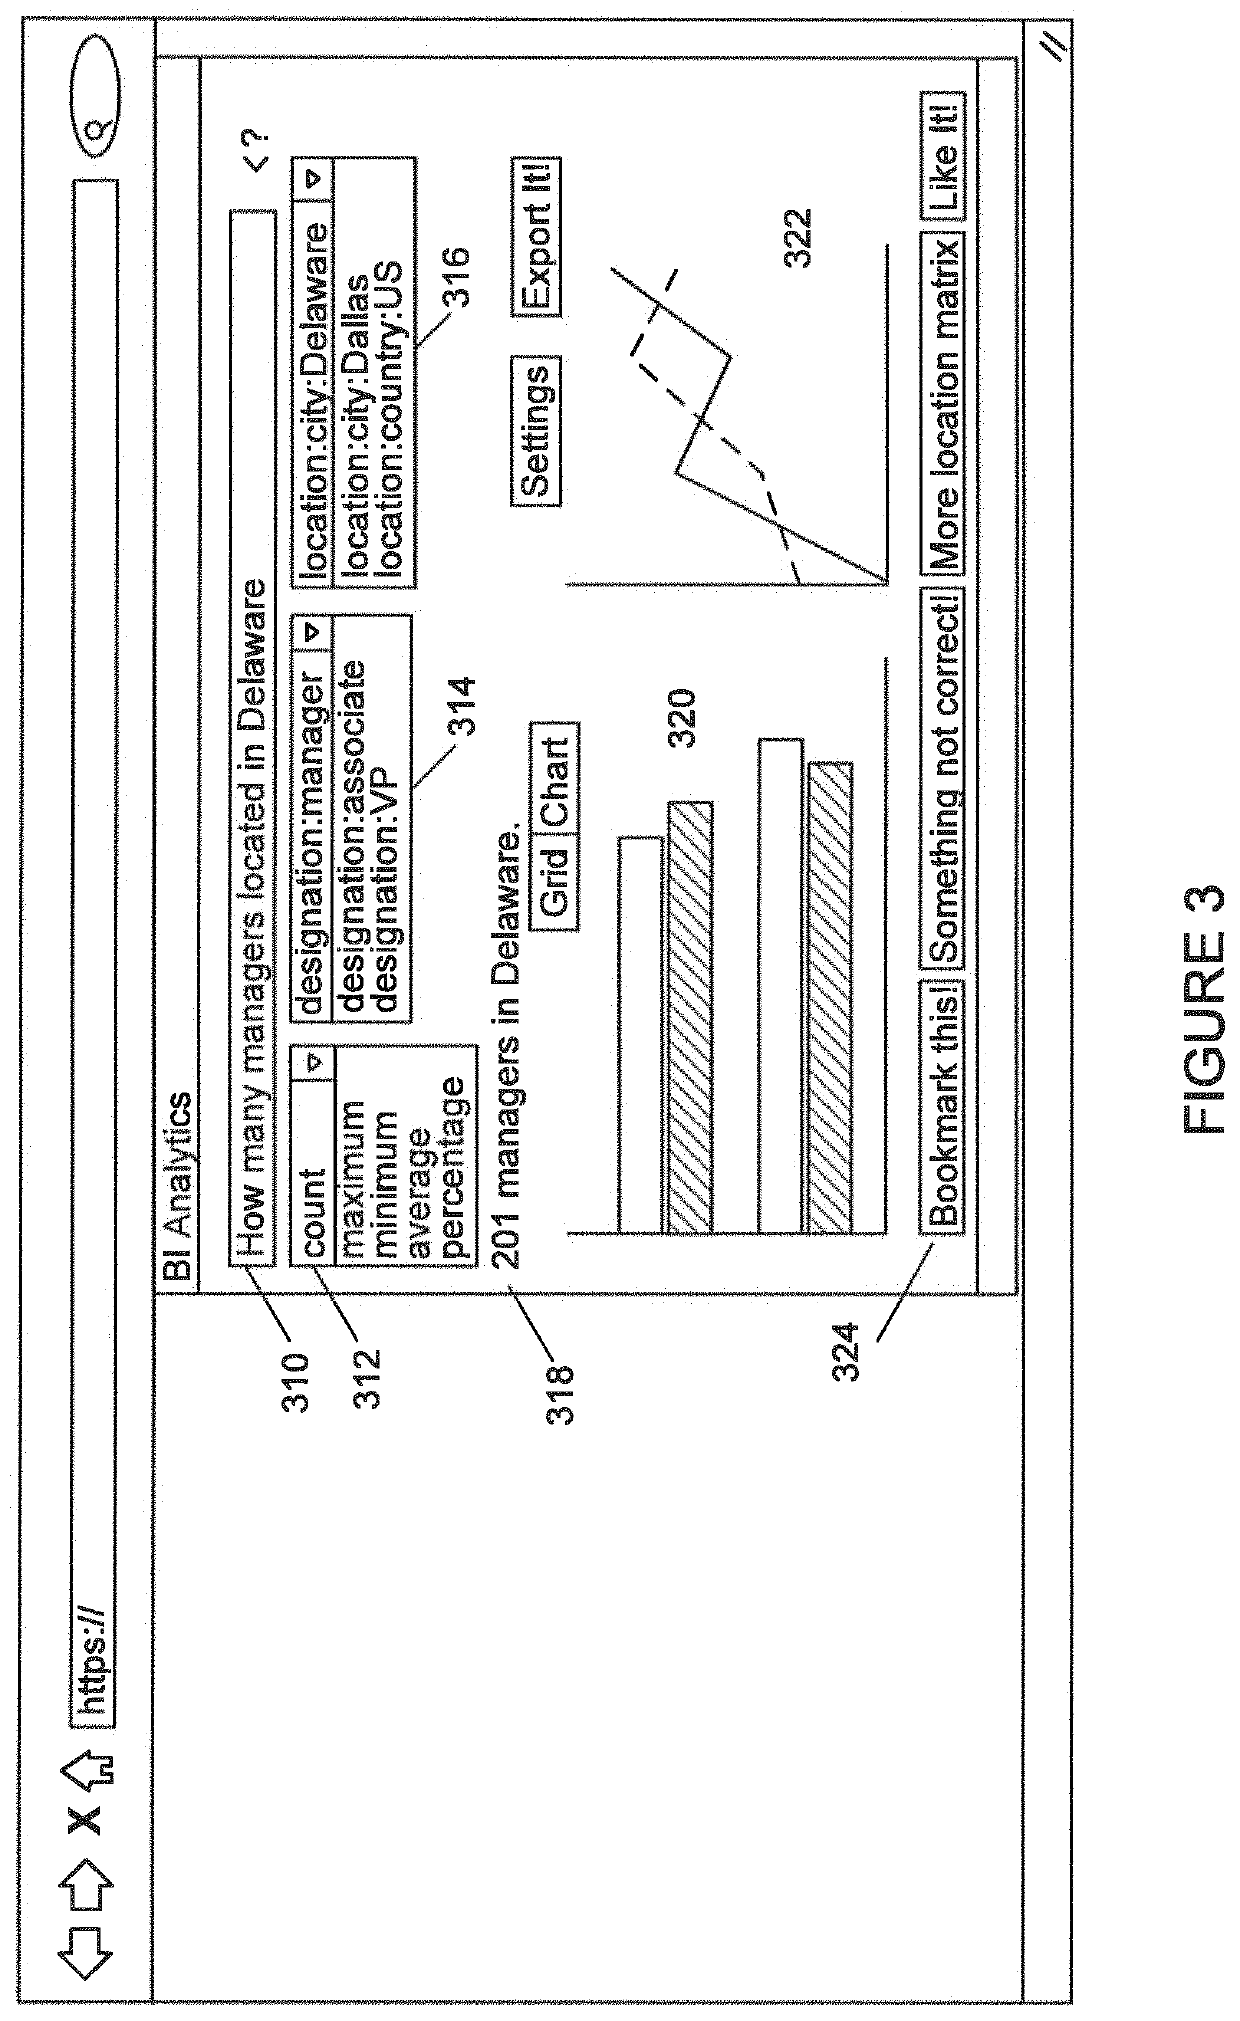 Systems and methods for automated analysis of business intelligence